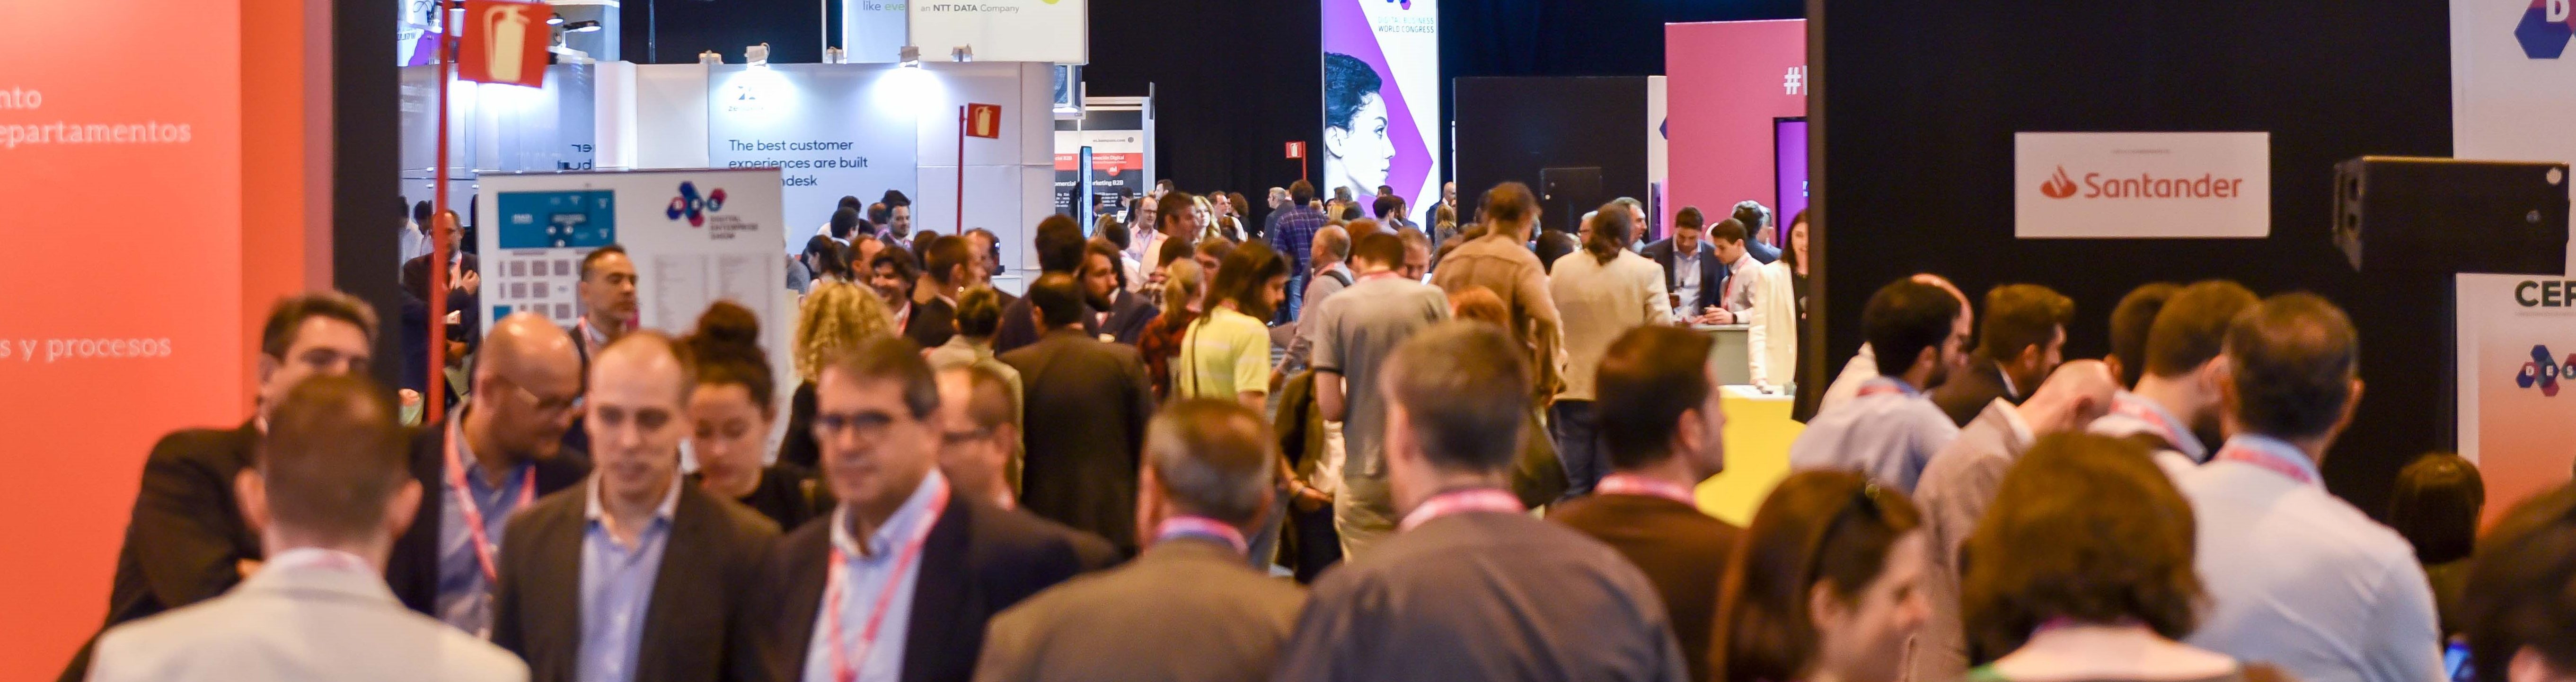 Digital Enterprise Show will gather over 30,000 executives in the next edition